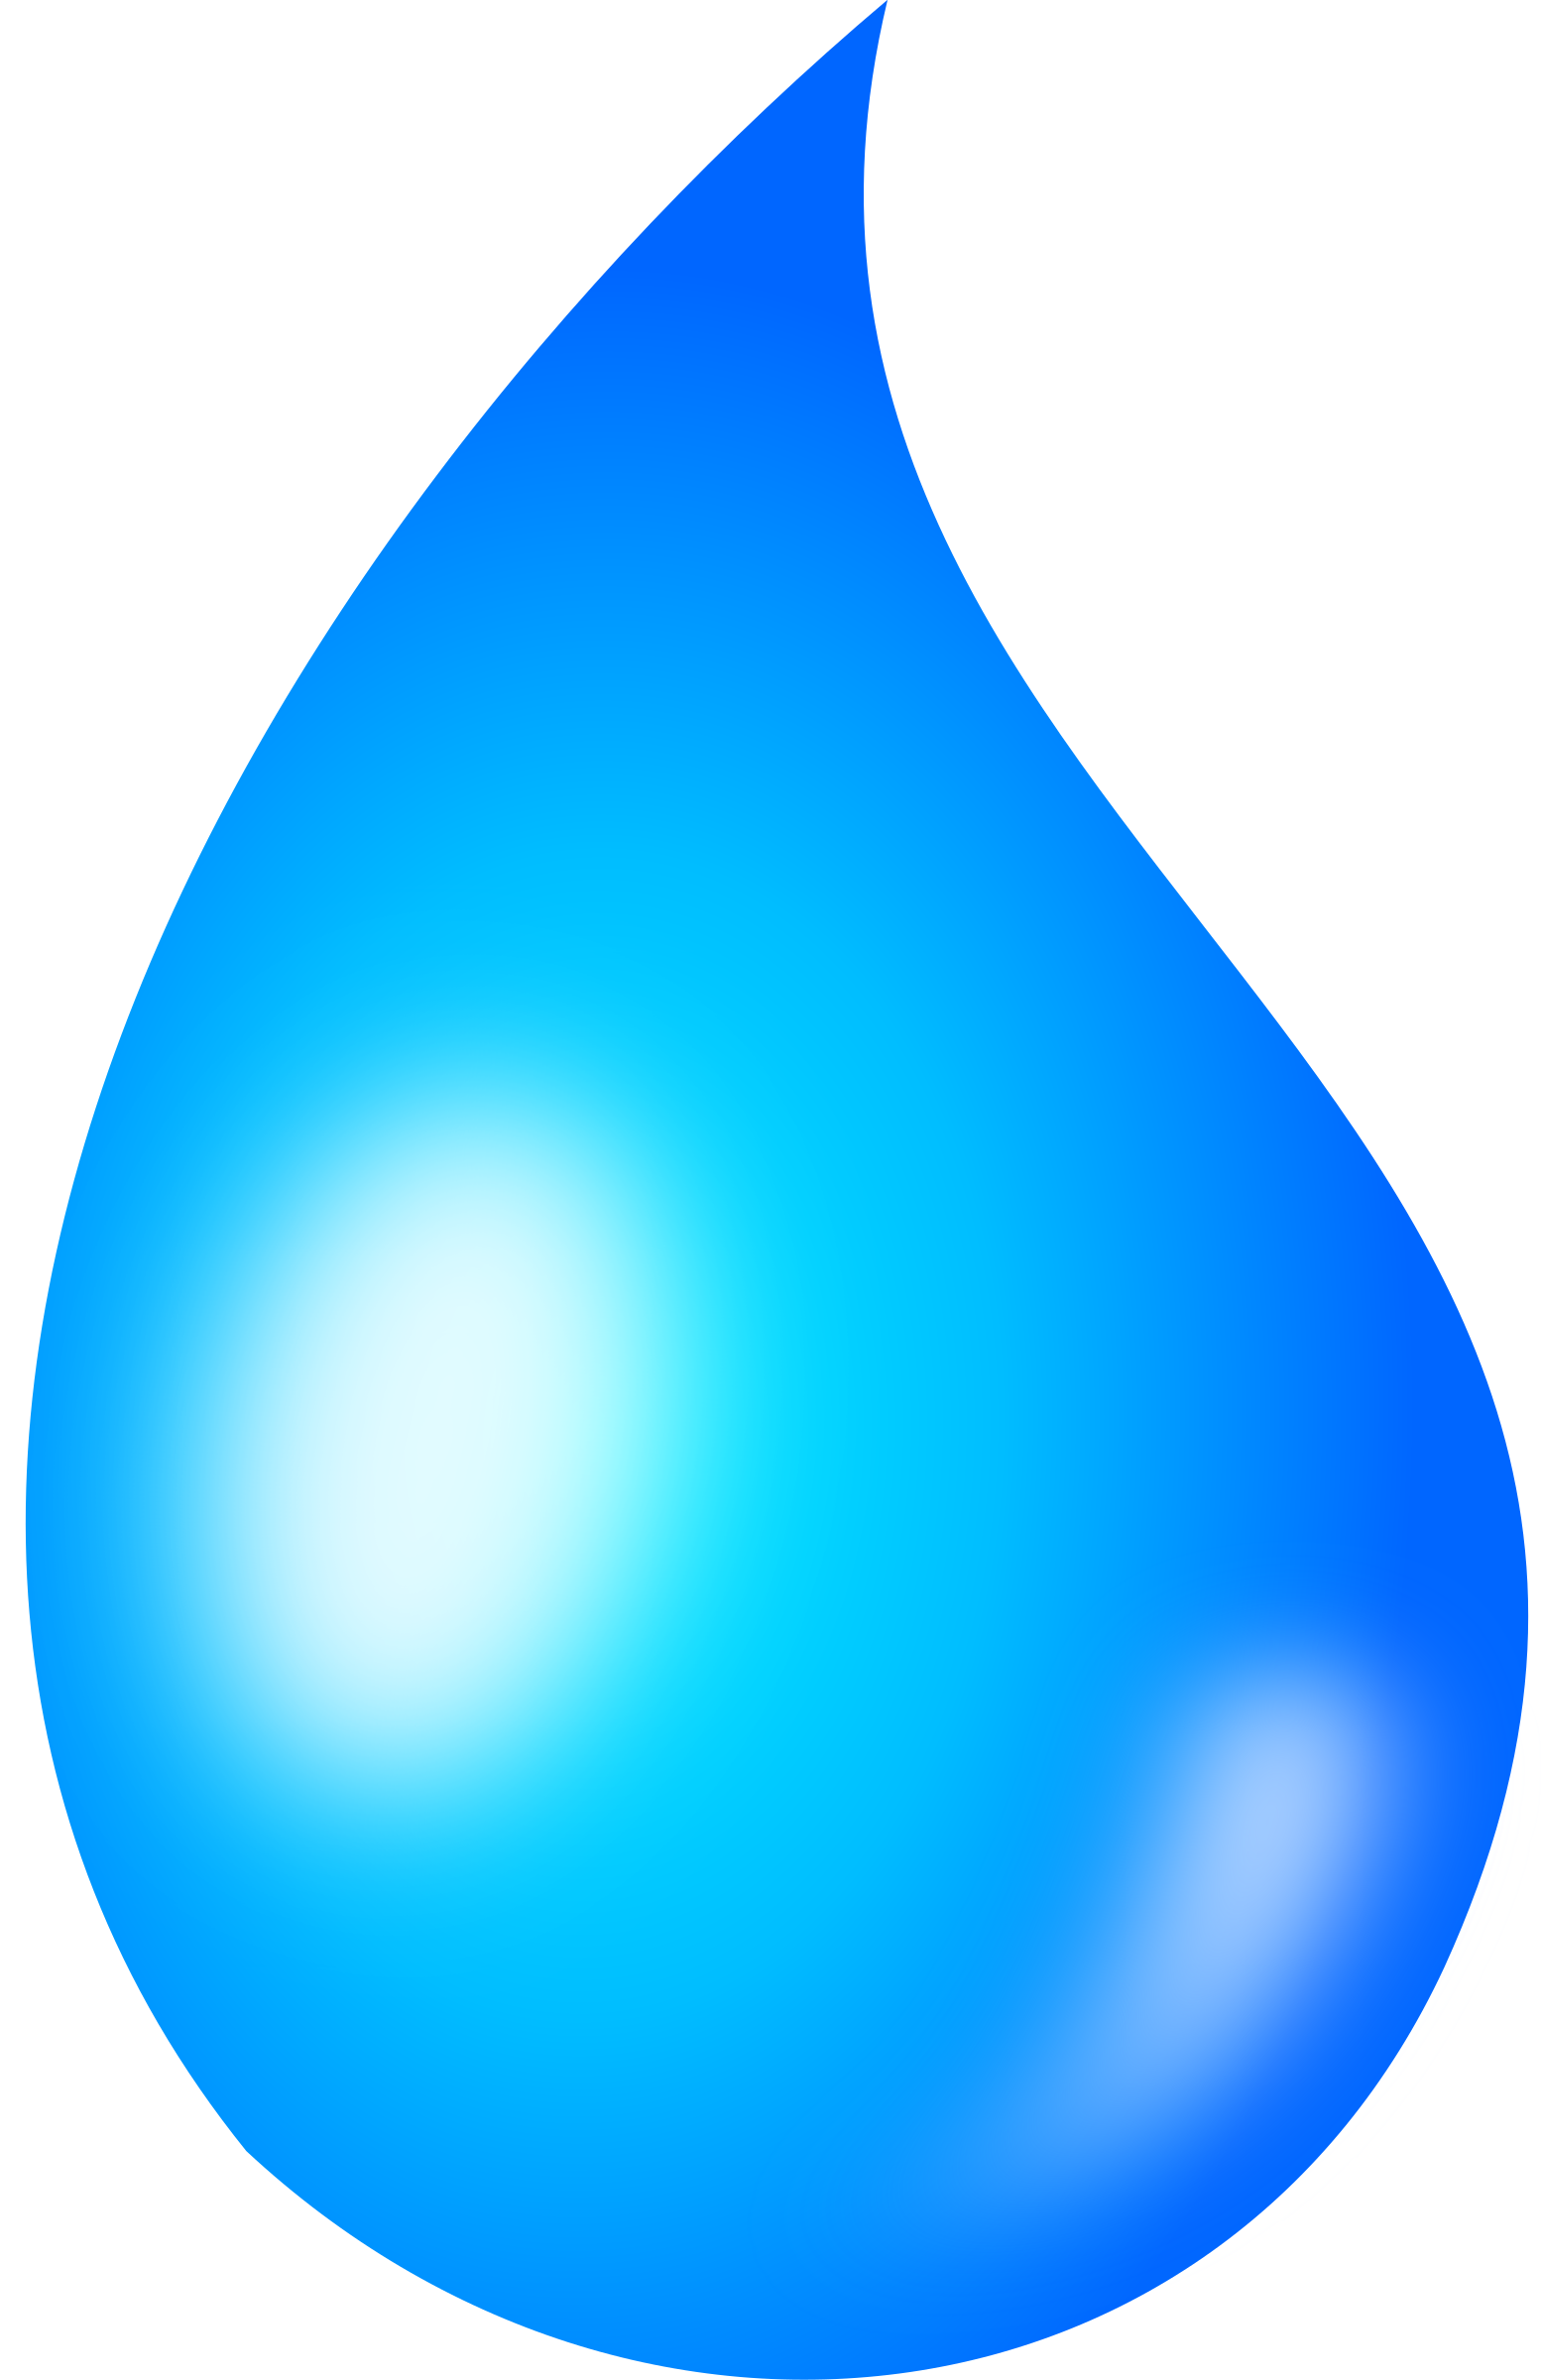 Faucet clipart water droplet. Drop shaded big image